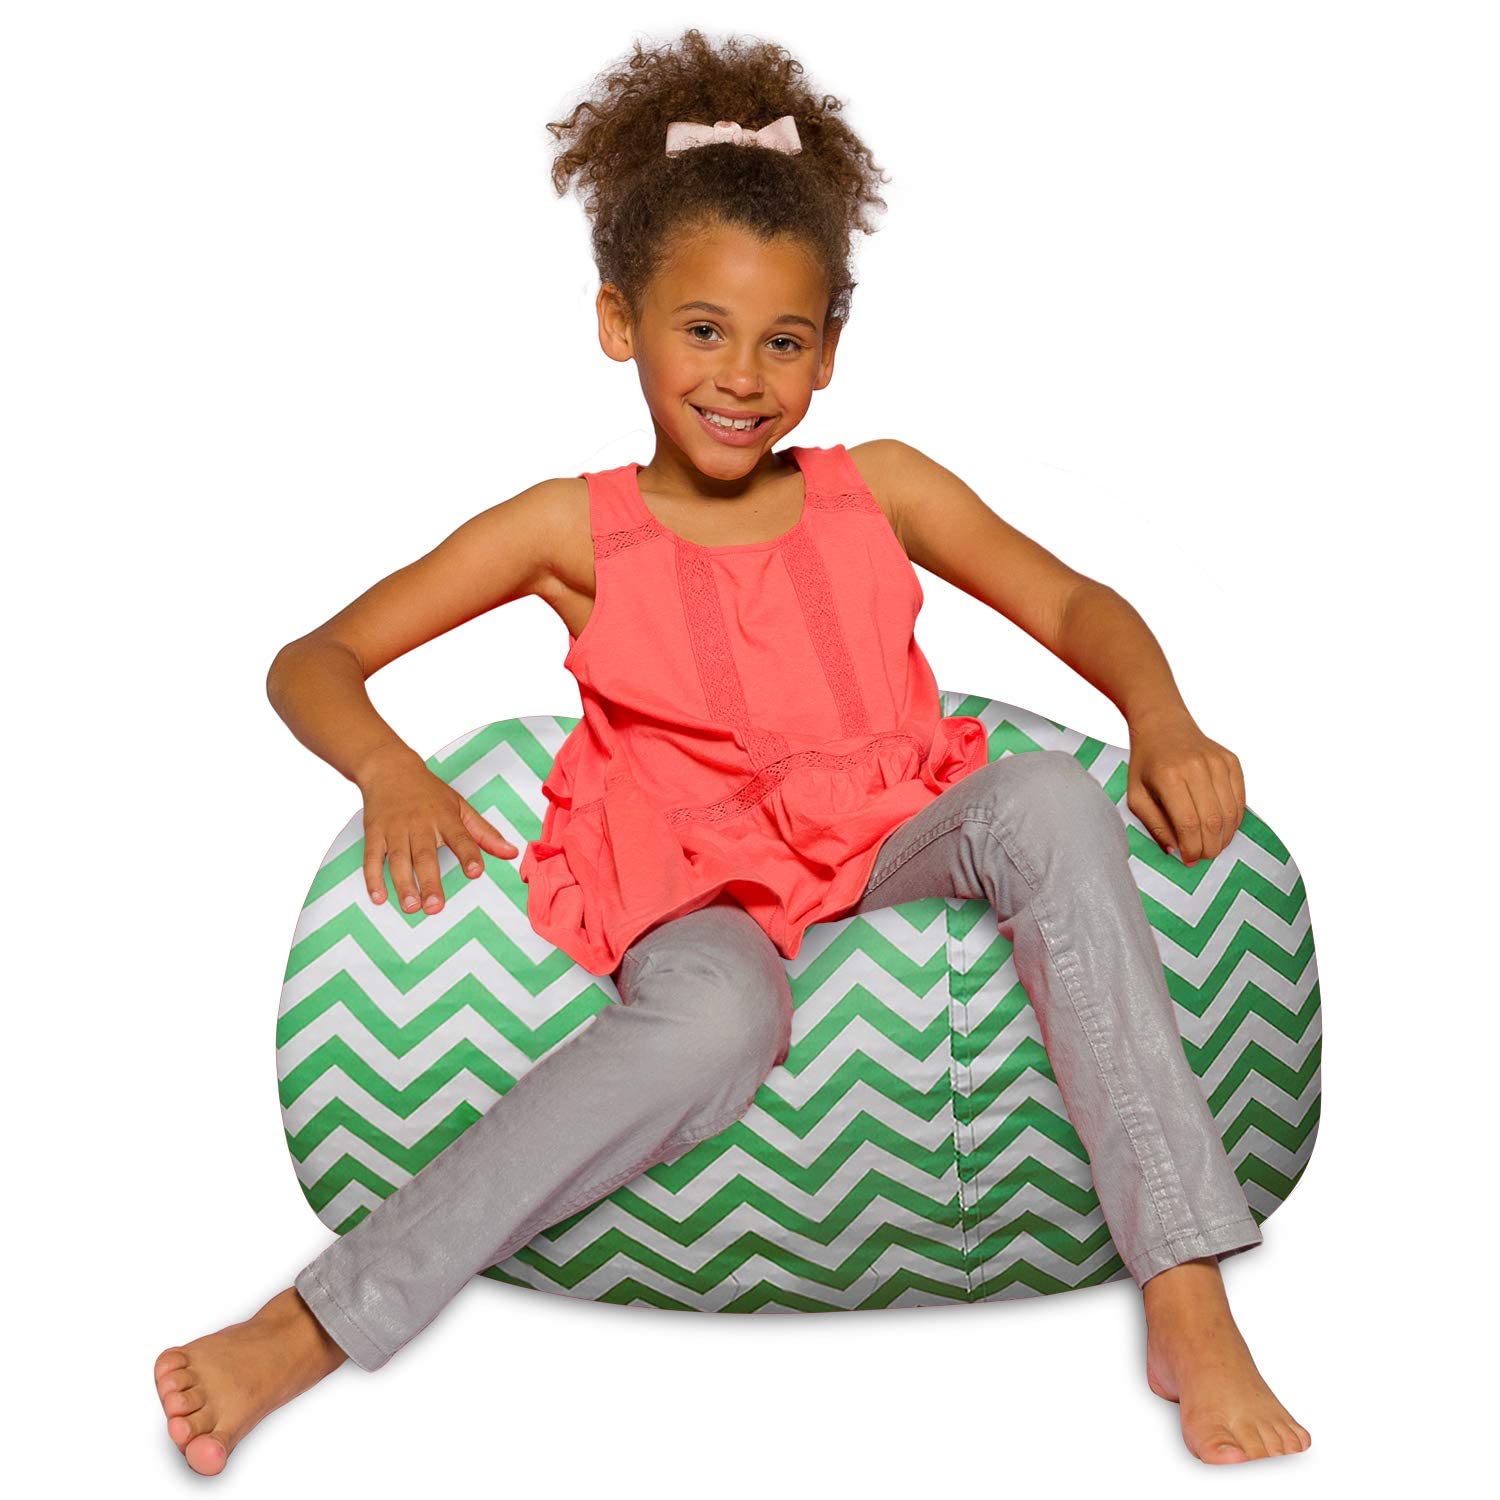 Posh Creations Bean Bag Chair for Kids, Teens, and Adults Includes Removable and Machine Washable Cover,